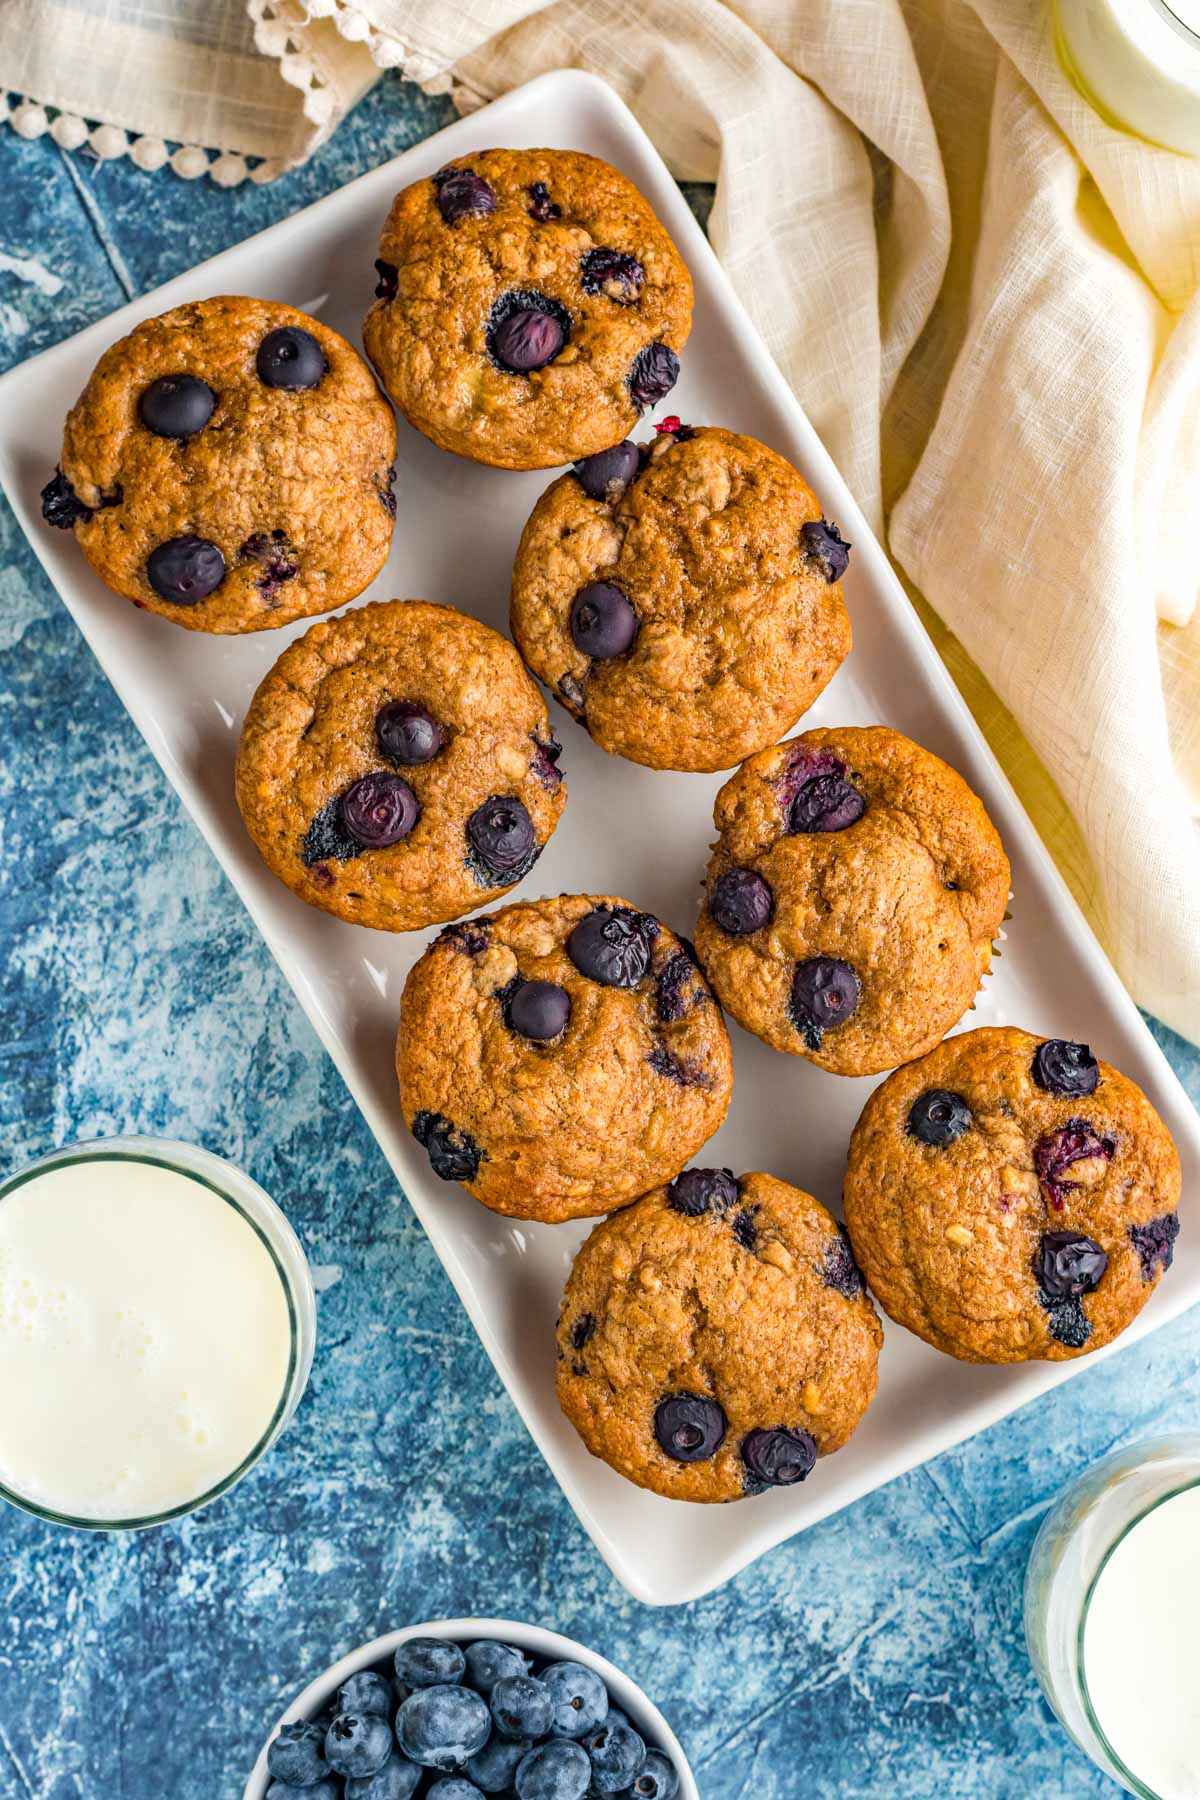 pan with 8 blueberry banana muffins and a cold glass of milk next to fresh blueberries